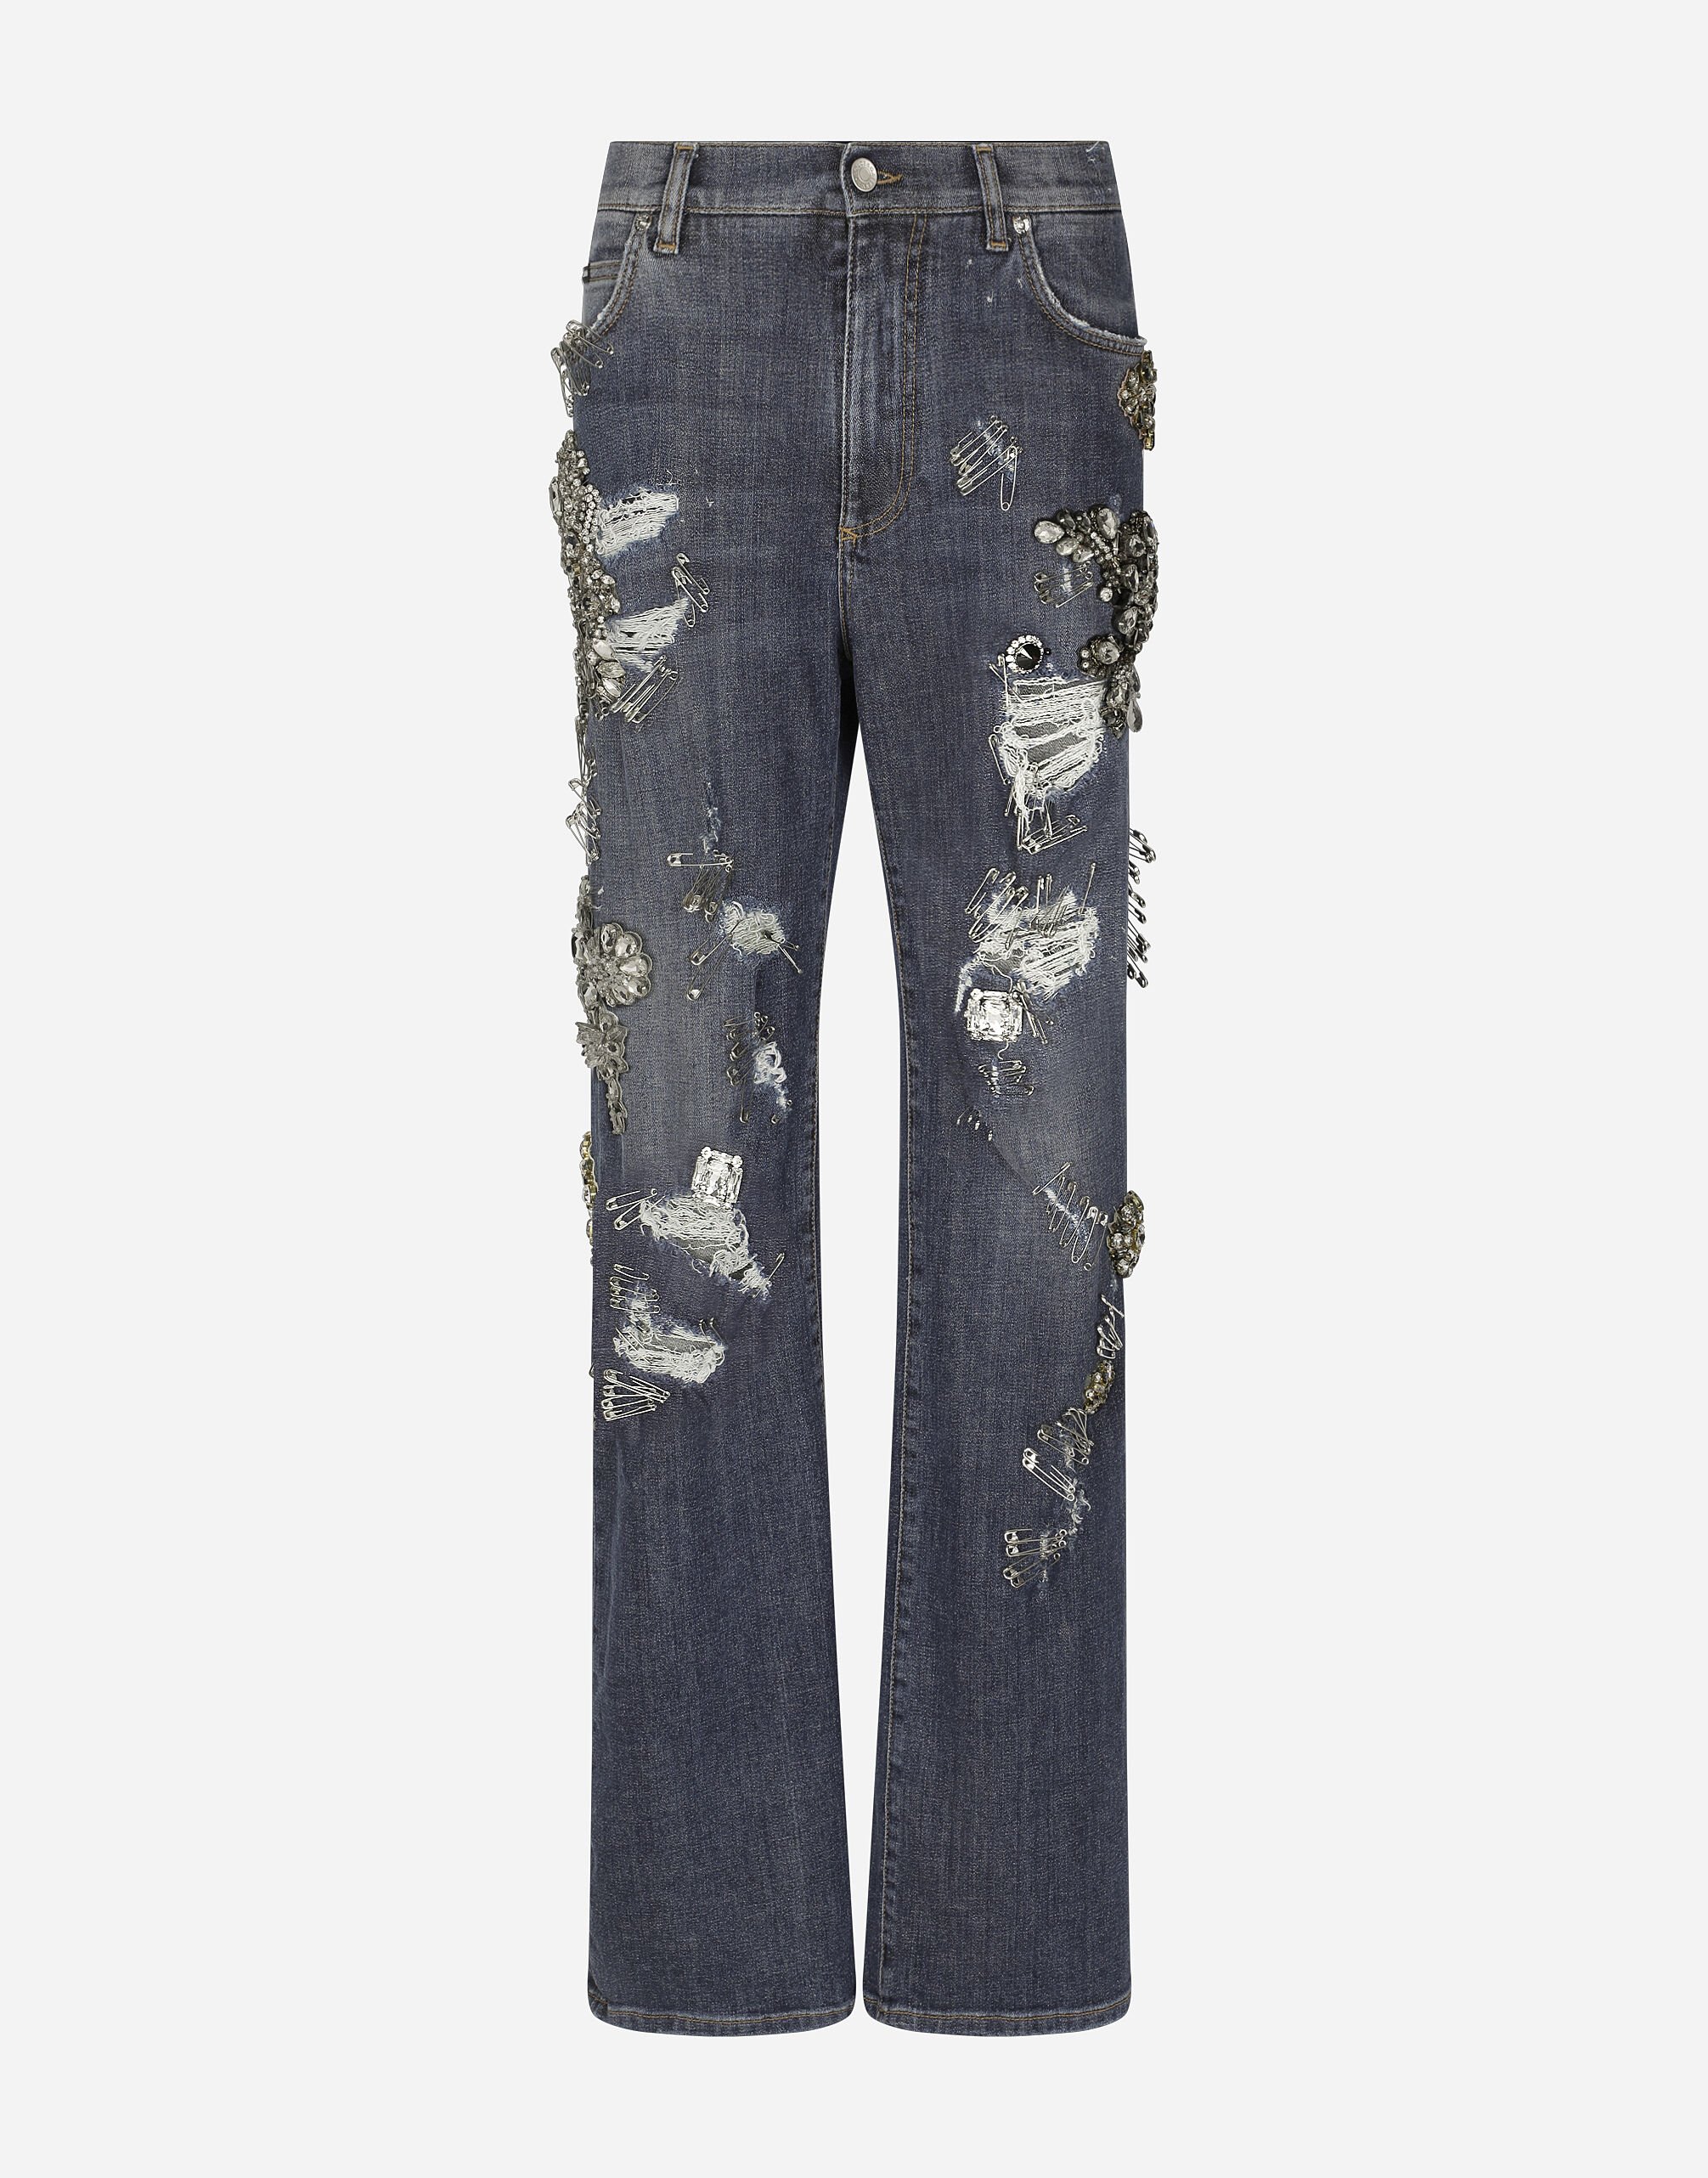 Dolce & Gabbana Denim jeans with ripped details and appliqués Multicolor FTCOJDG8HL8